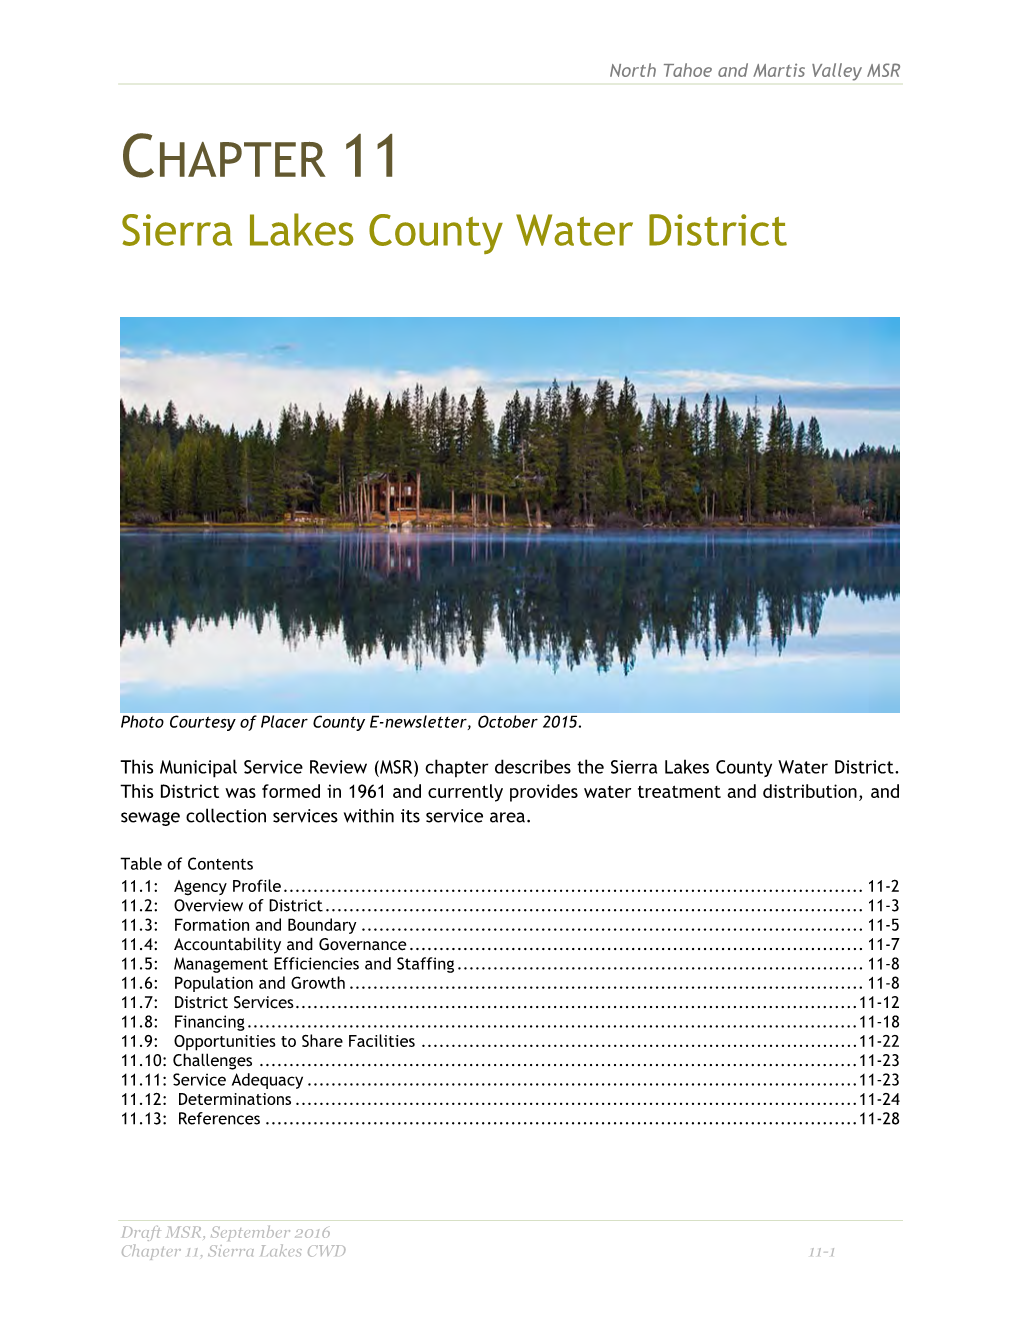 CHAPTER 11 Sierra Lakes County Water District